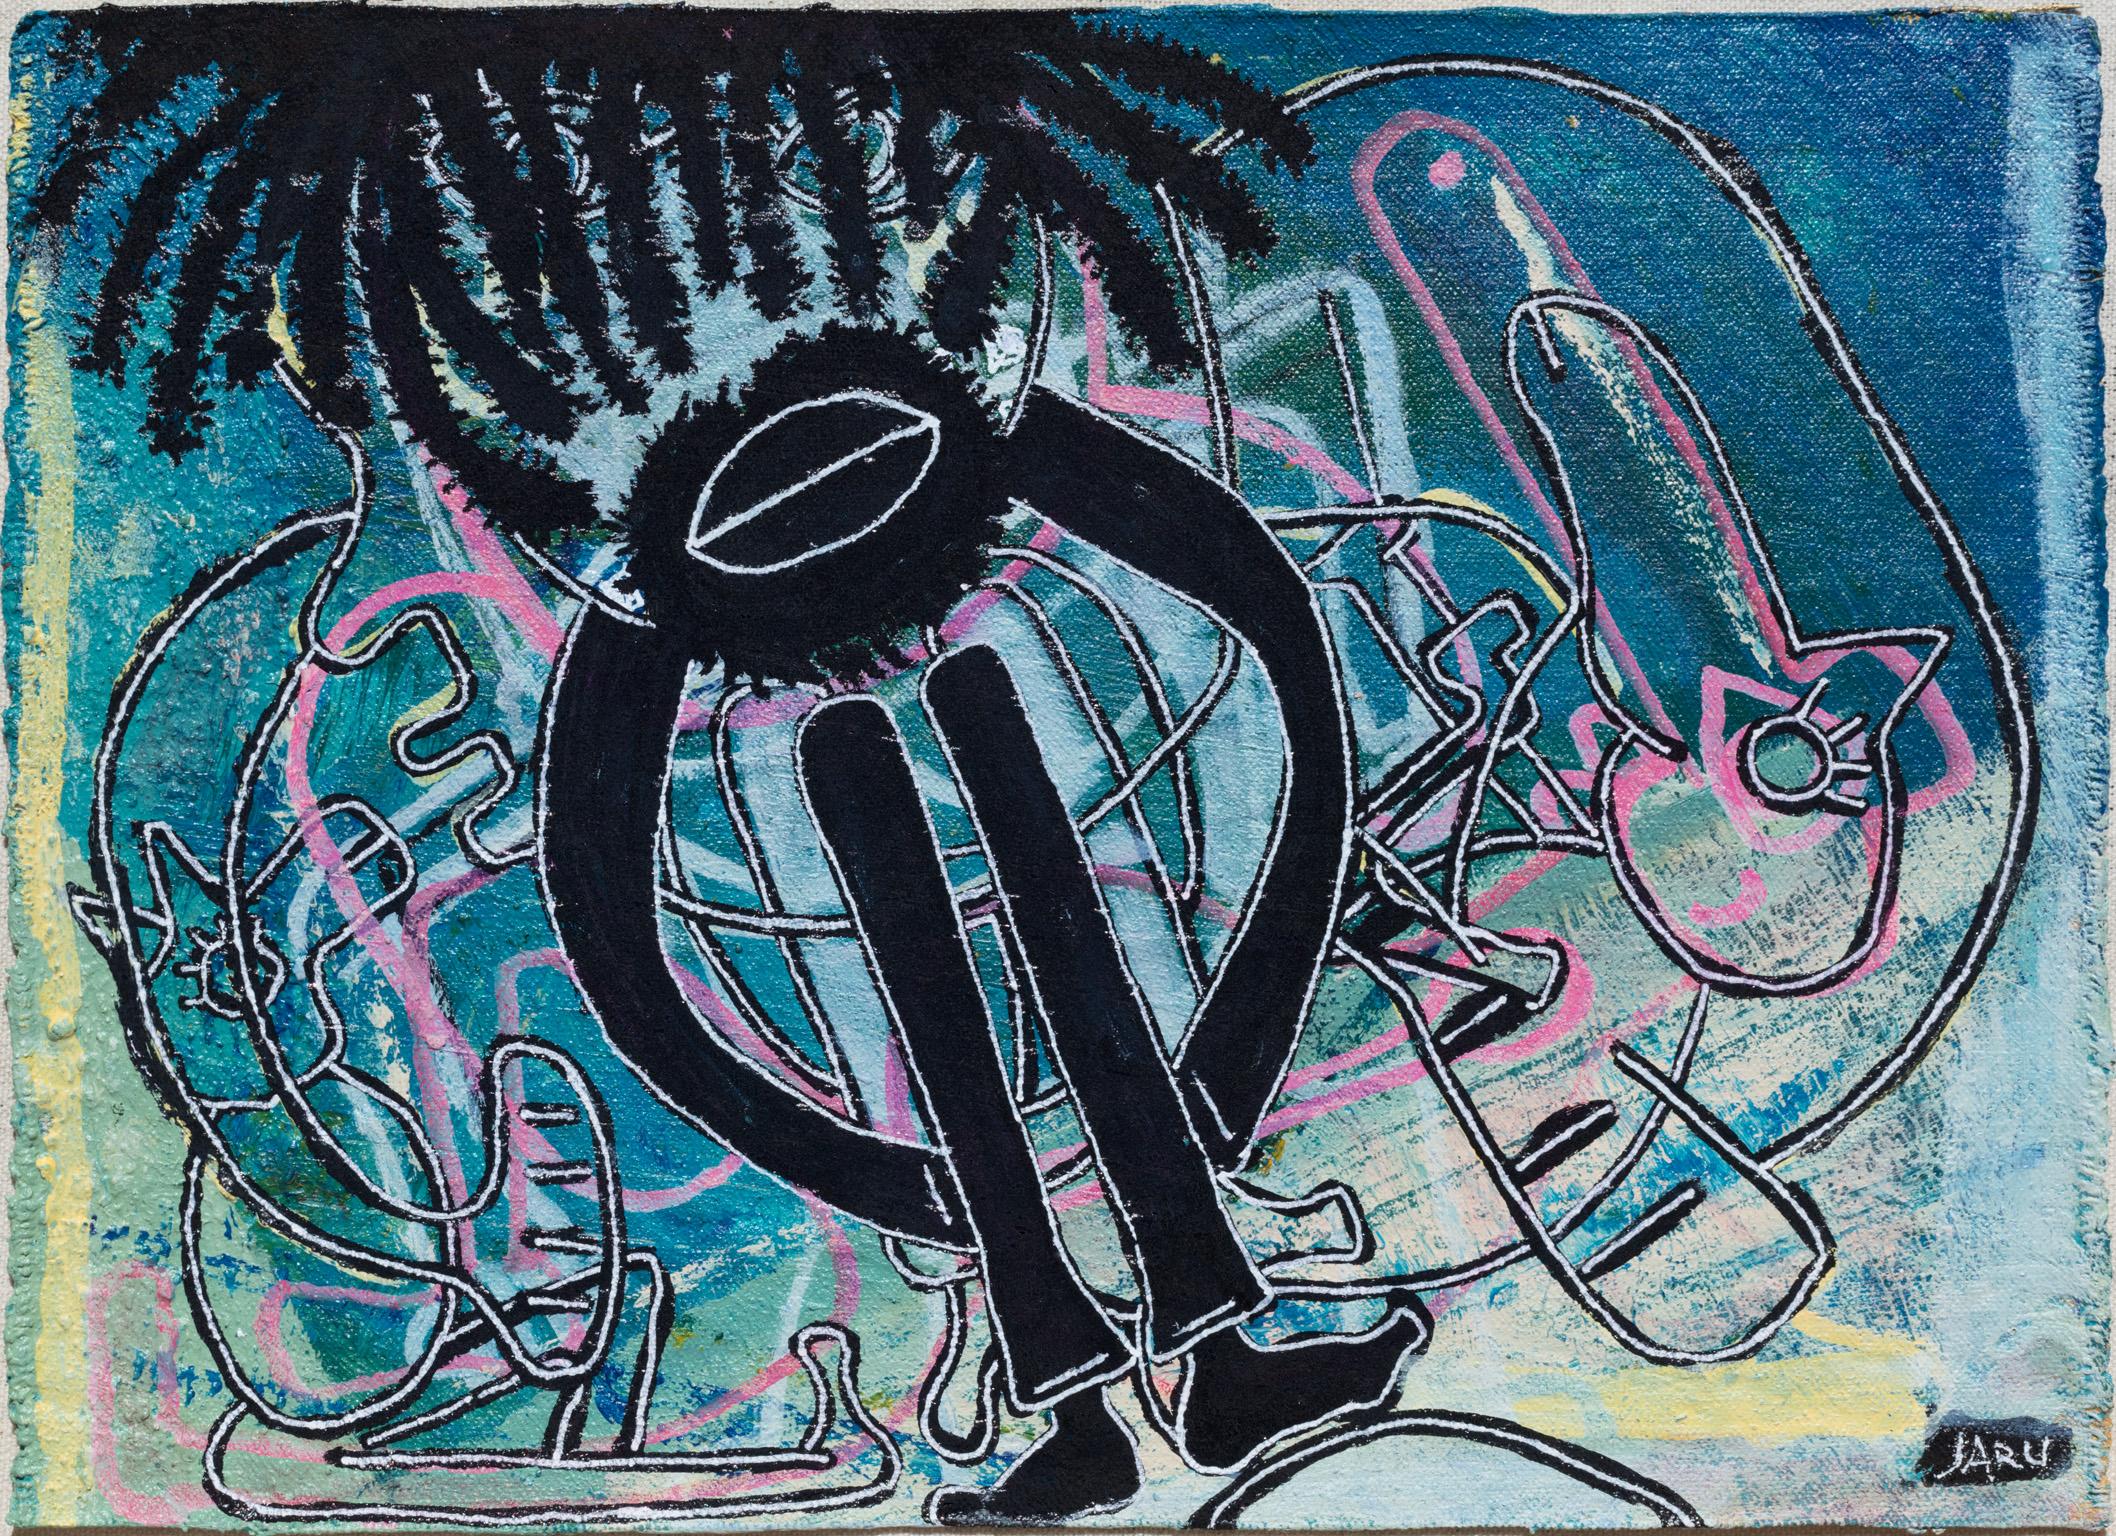 Parris Jaru's International Farmer is a 9 x 12 inches surrealist oil painting. The main color is blue. Animals simply outlined by a black and white mark are recognizable in the background while a surreal human figure, whit a spider like haircut